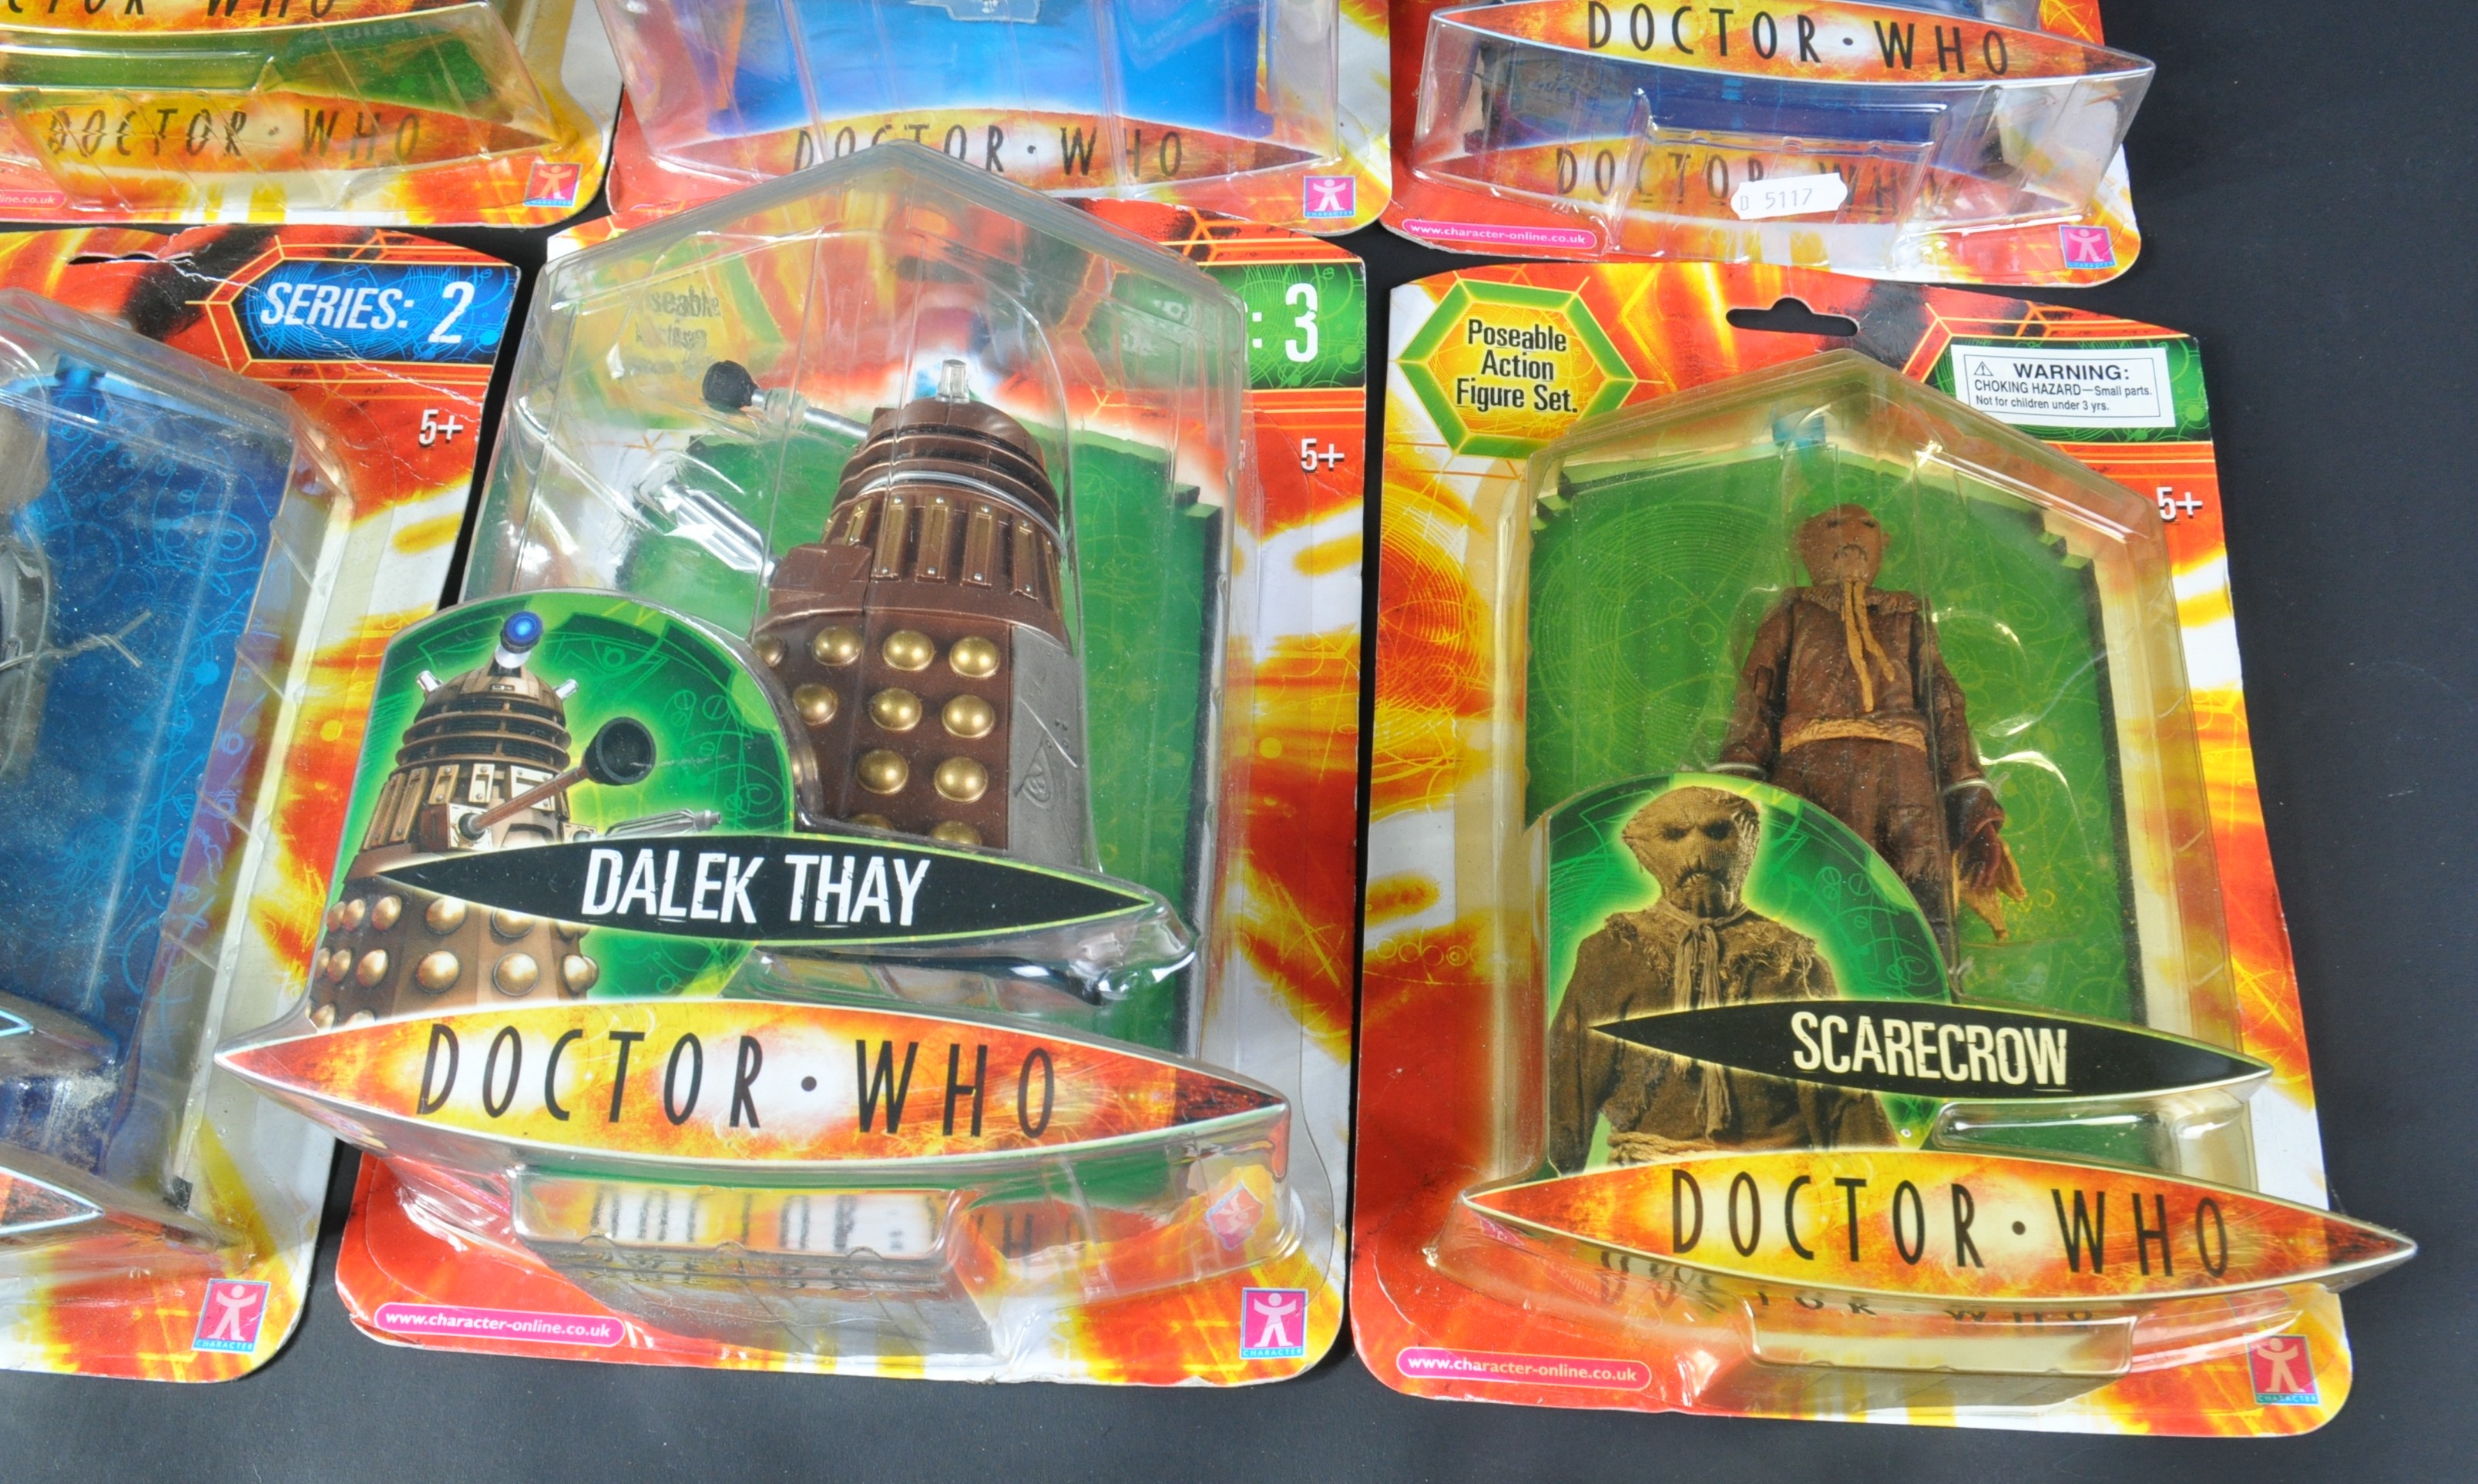 DOCTOR WHO - CHARACTER OPTIONS - COLLECTION OF ACTION FIGURES - Image 3 of 5